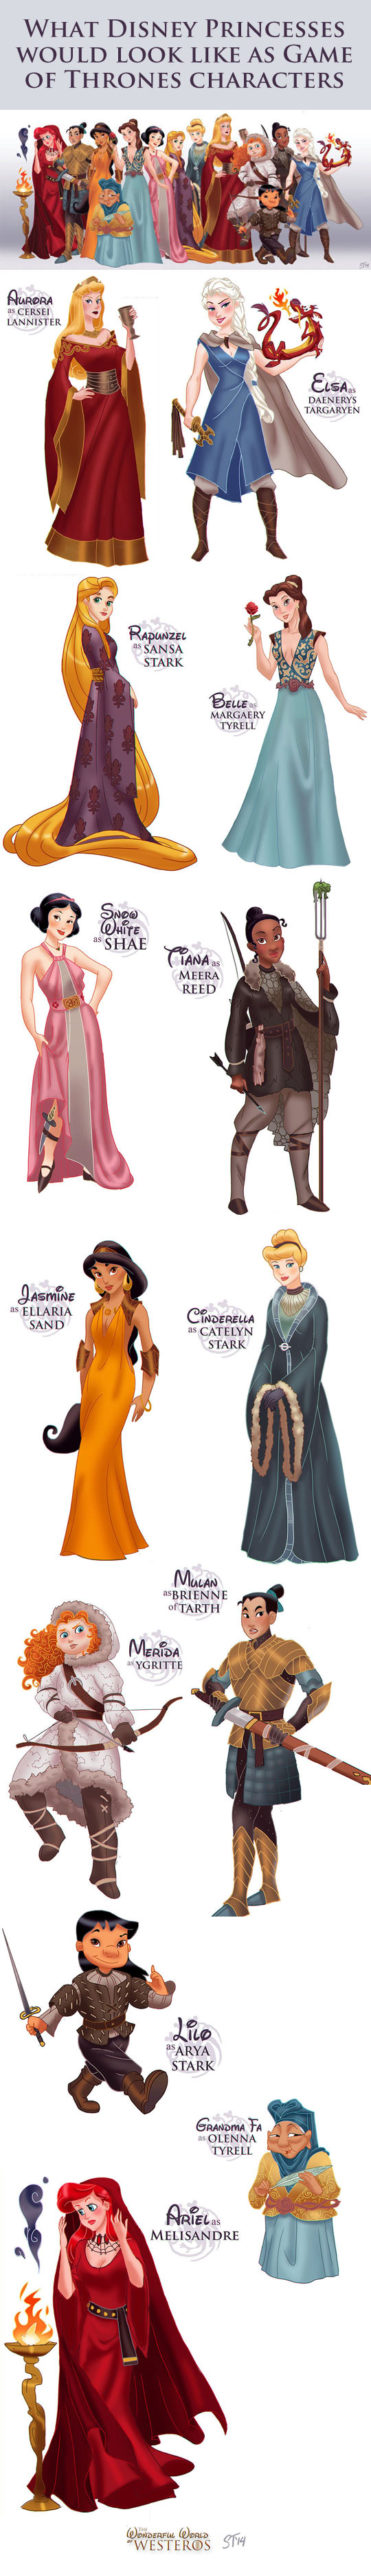 I Game of Thrones-ed the Disney Princesses (With the help of